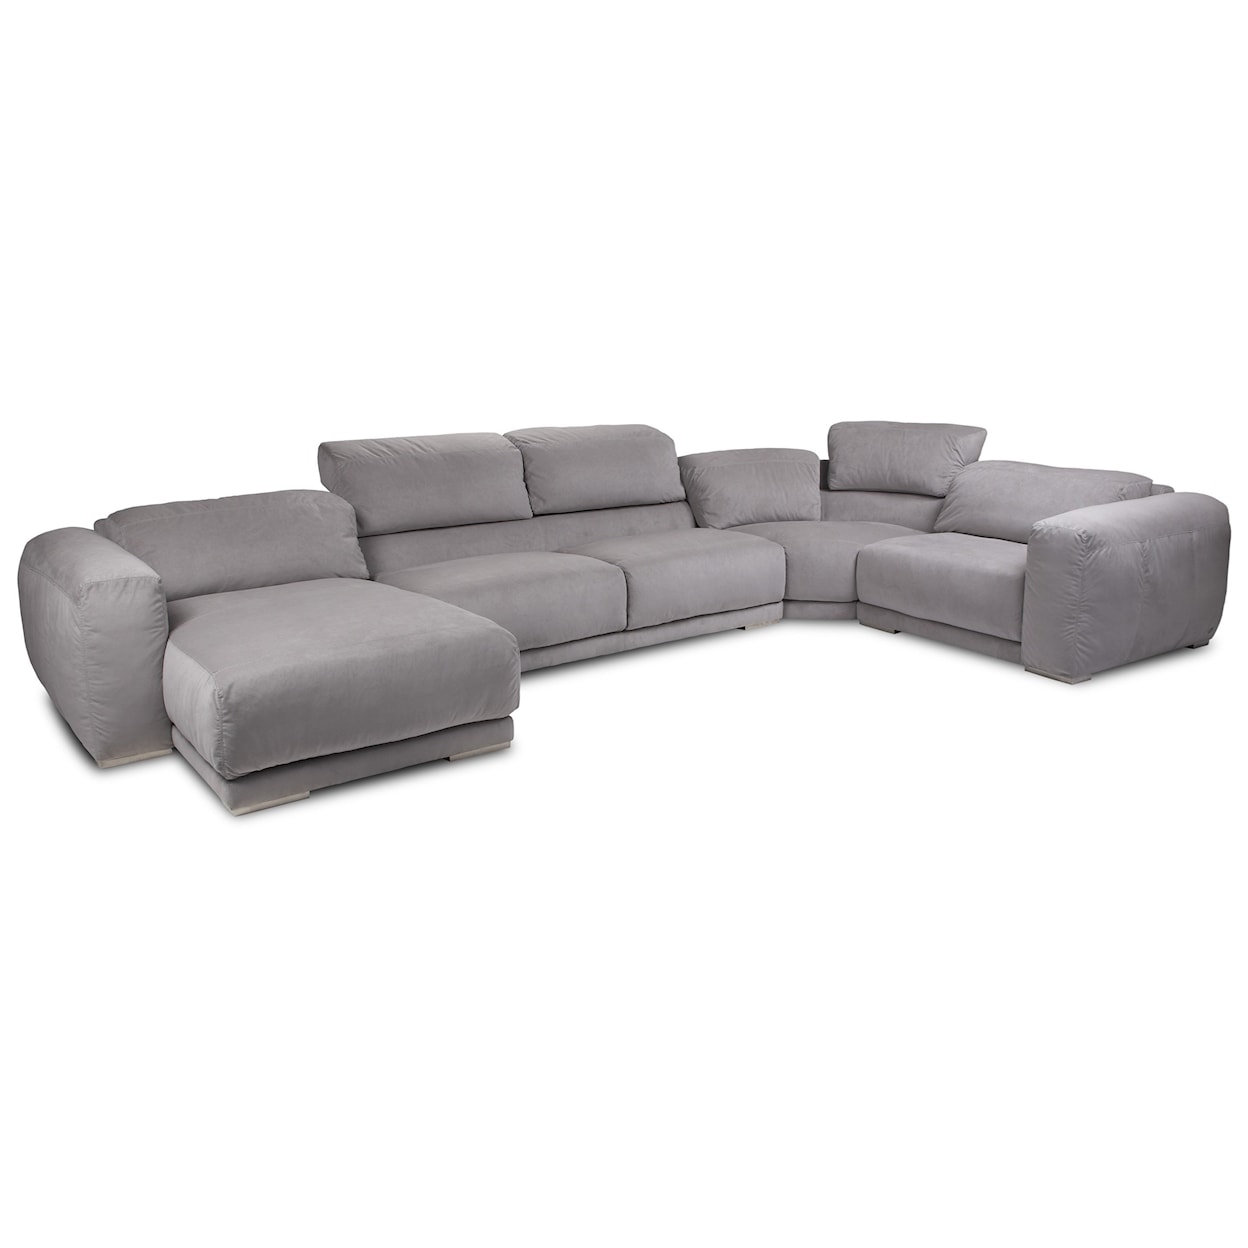 American Leather Malibu 4-Seat Sectional w/ Right Arm Sitting Chaise